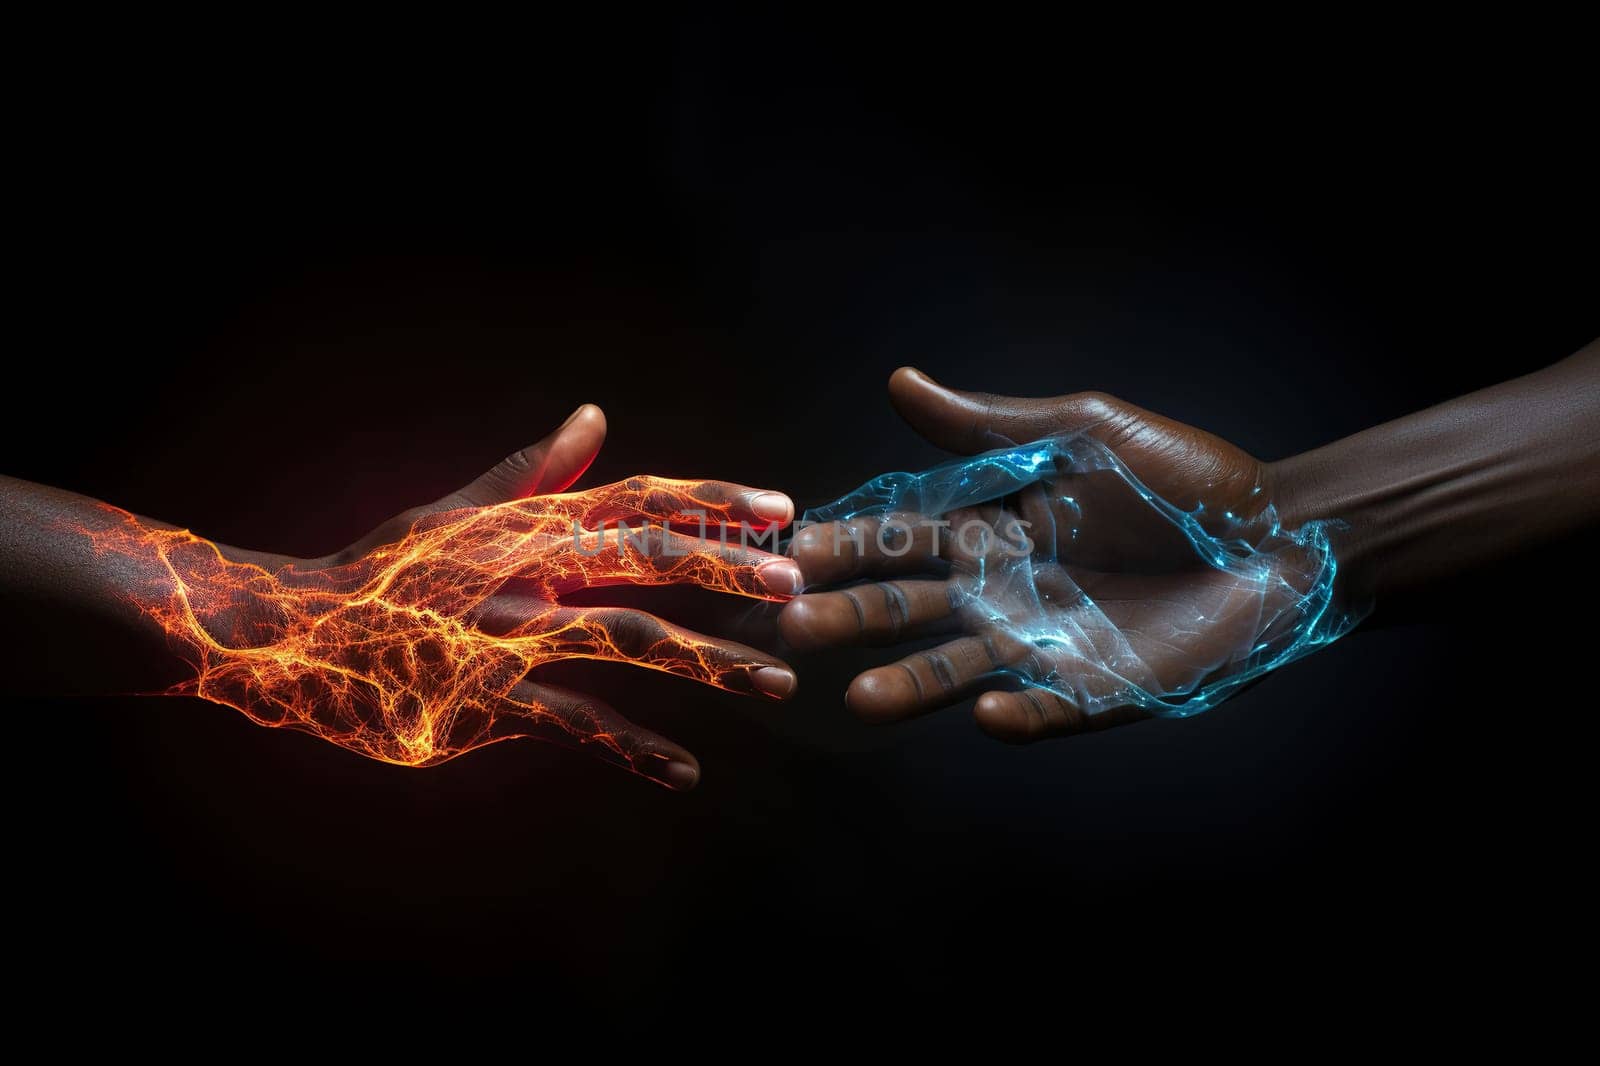 The two hands are connected by neural connections. Generated by artificial intelligence by Vovmar